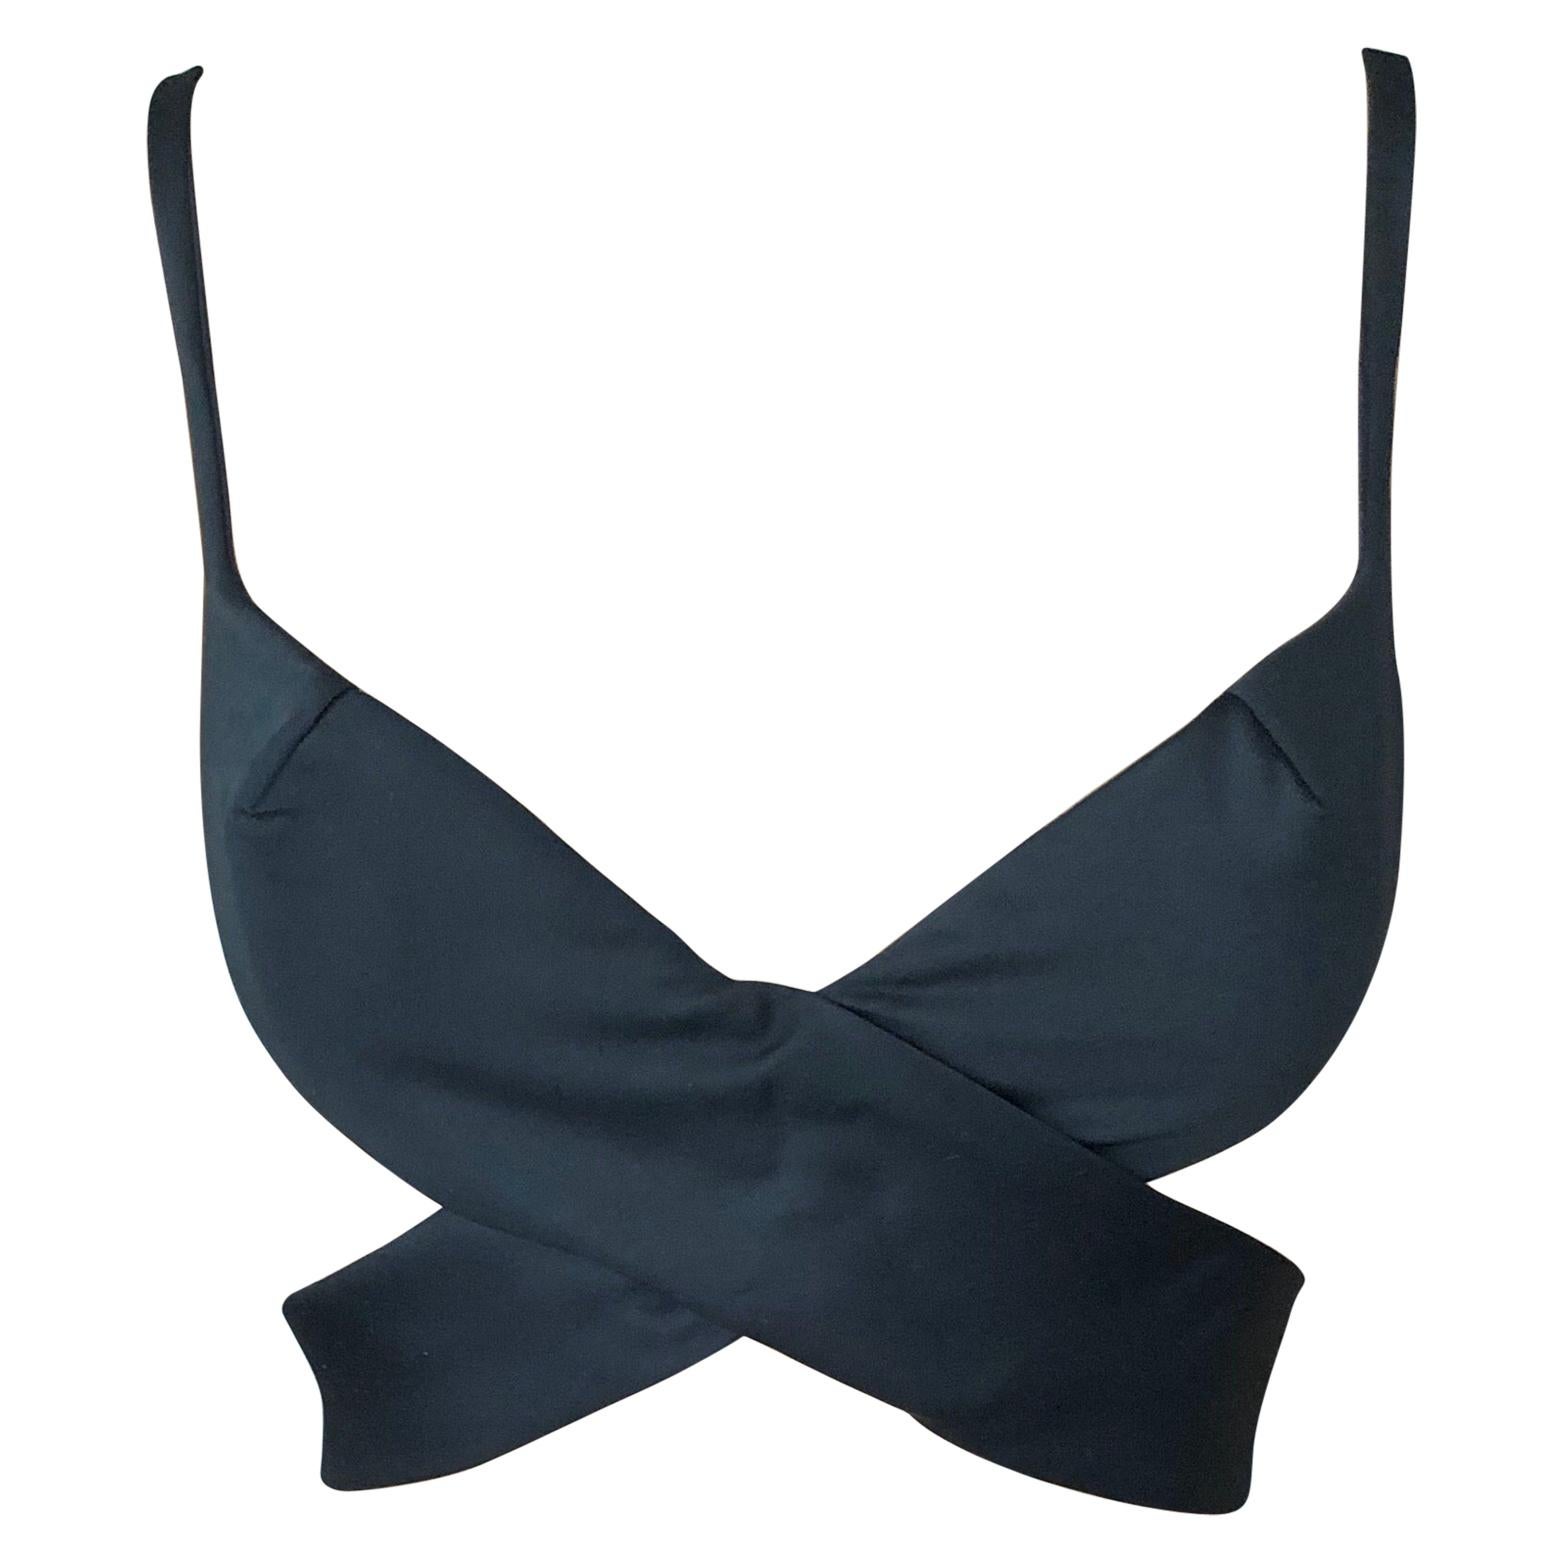 Tom Ford for Gucci S/S 2001 Runway Cutout Black Bustier Bra Crop Top For Sale